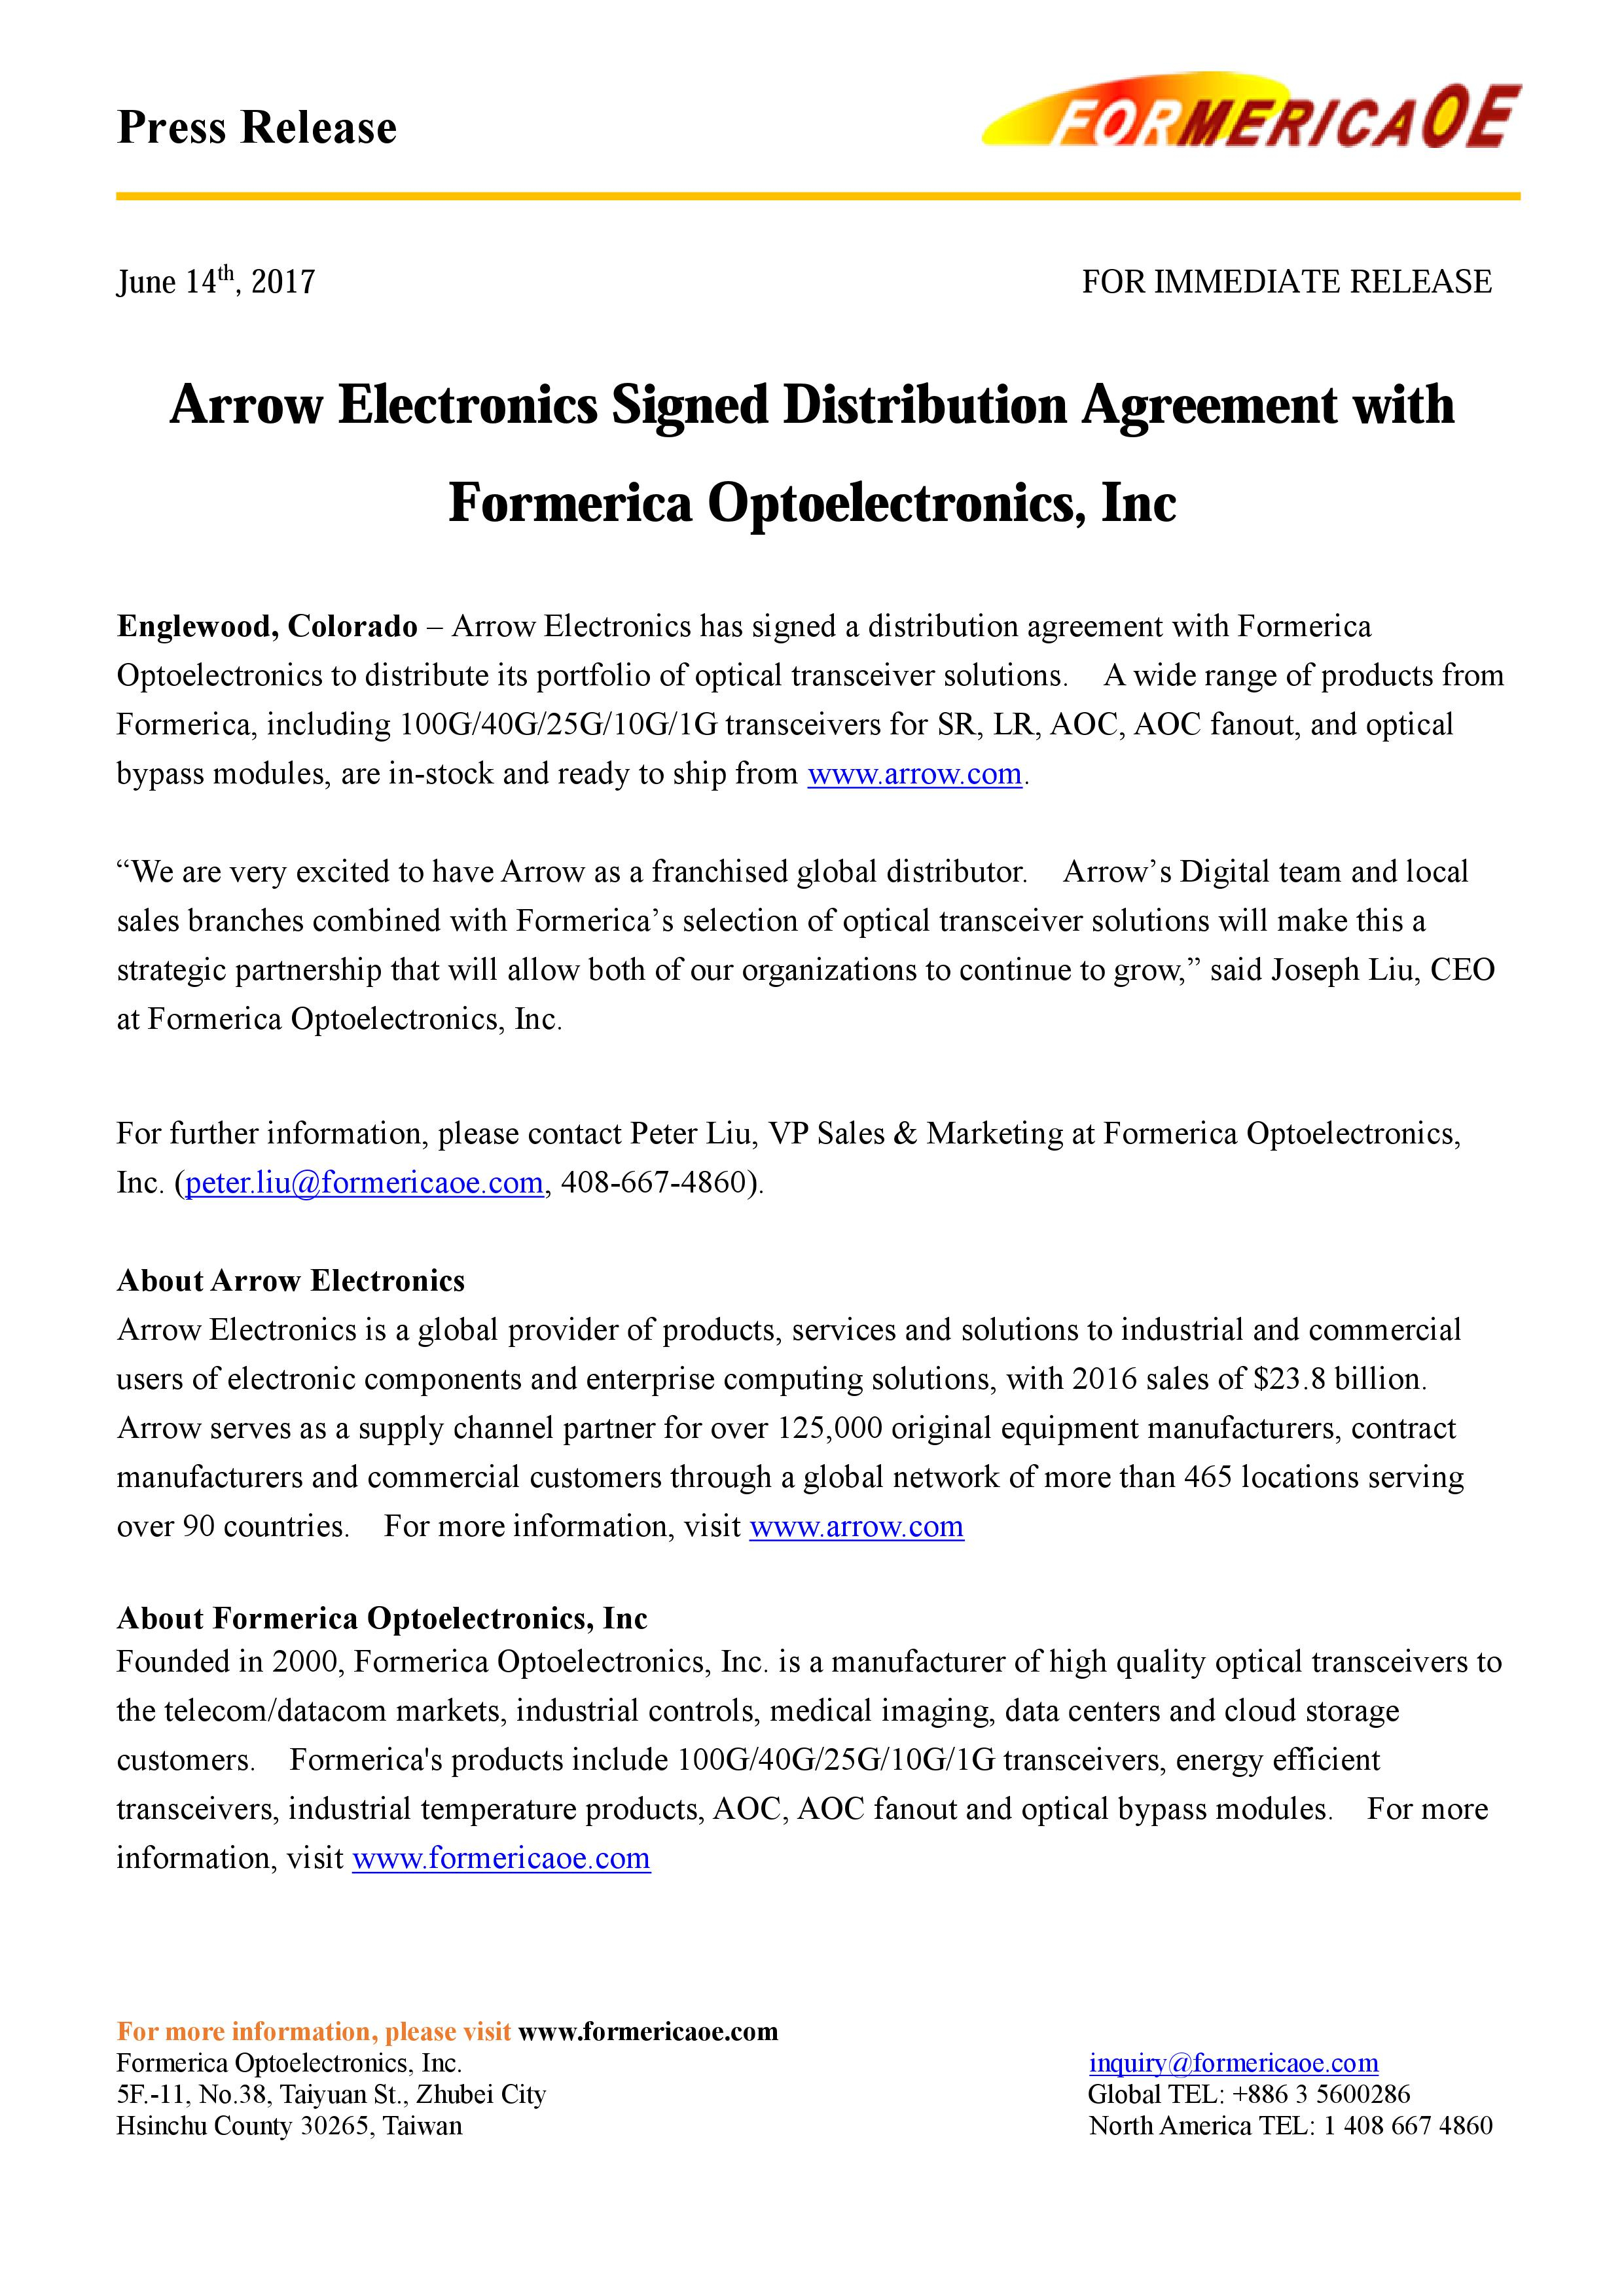 Sales And Distribution Agreement Arrow Electronics Signed Distribution Agreement With Formerica